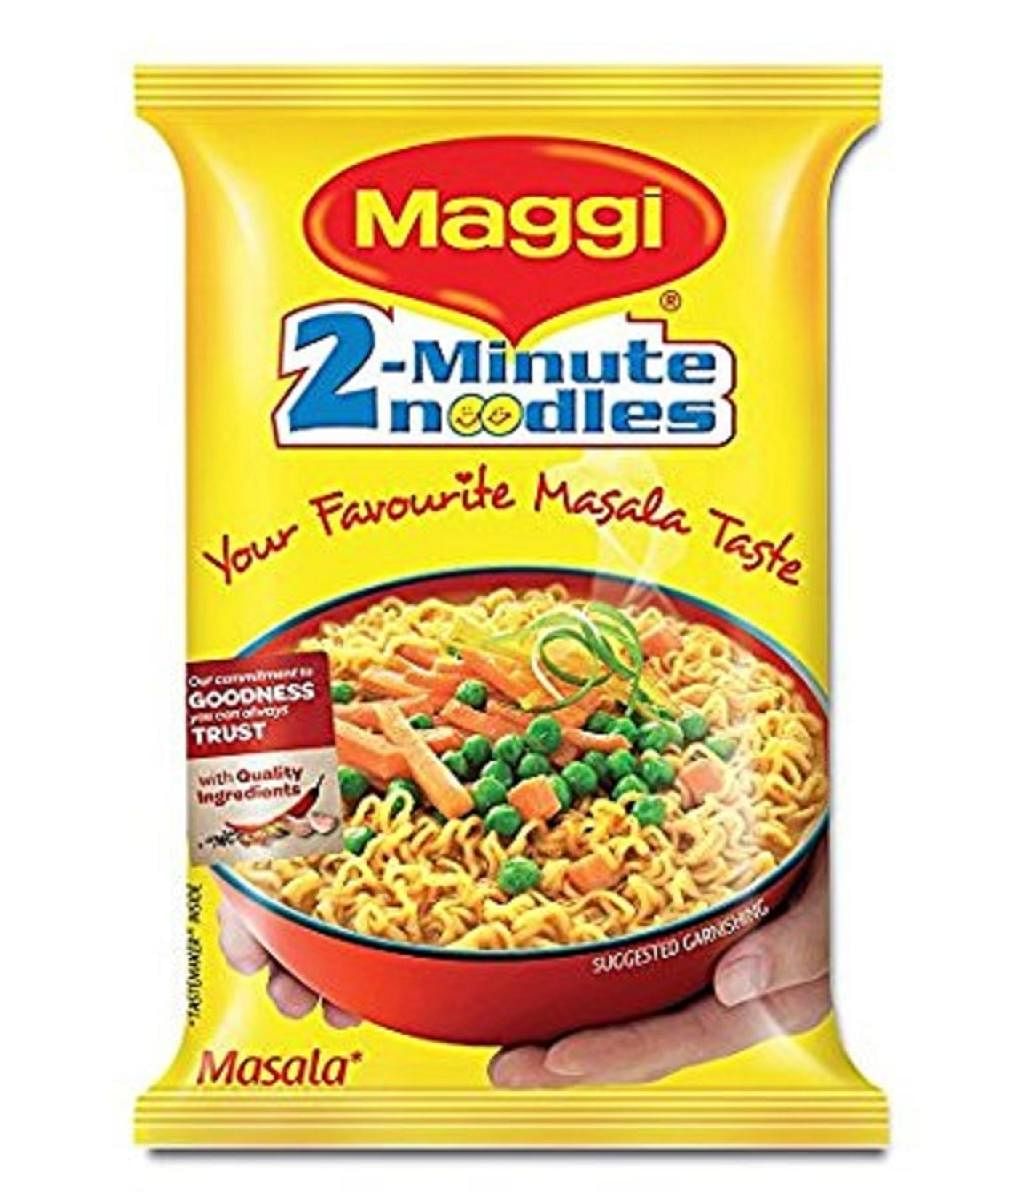 Maggi was banned by FSSAI in June 2015 for containing lead beyond permissible limits